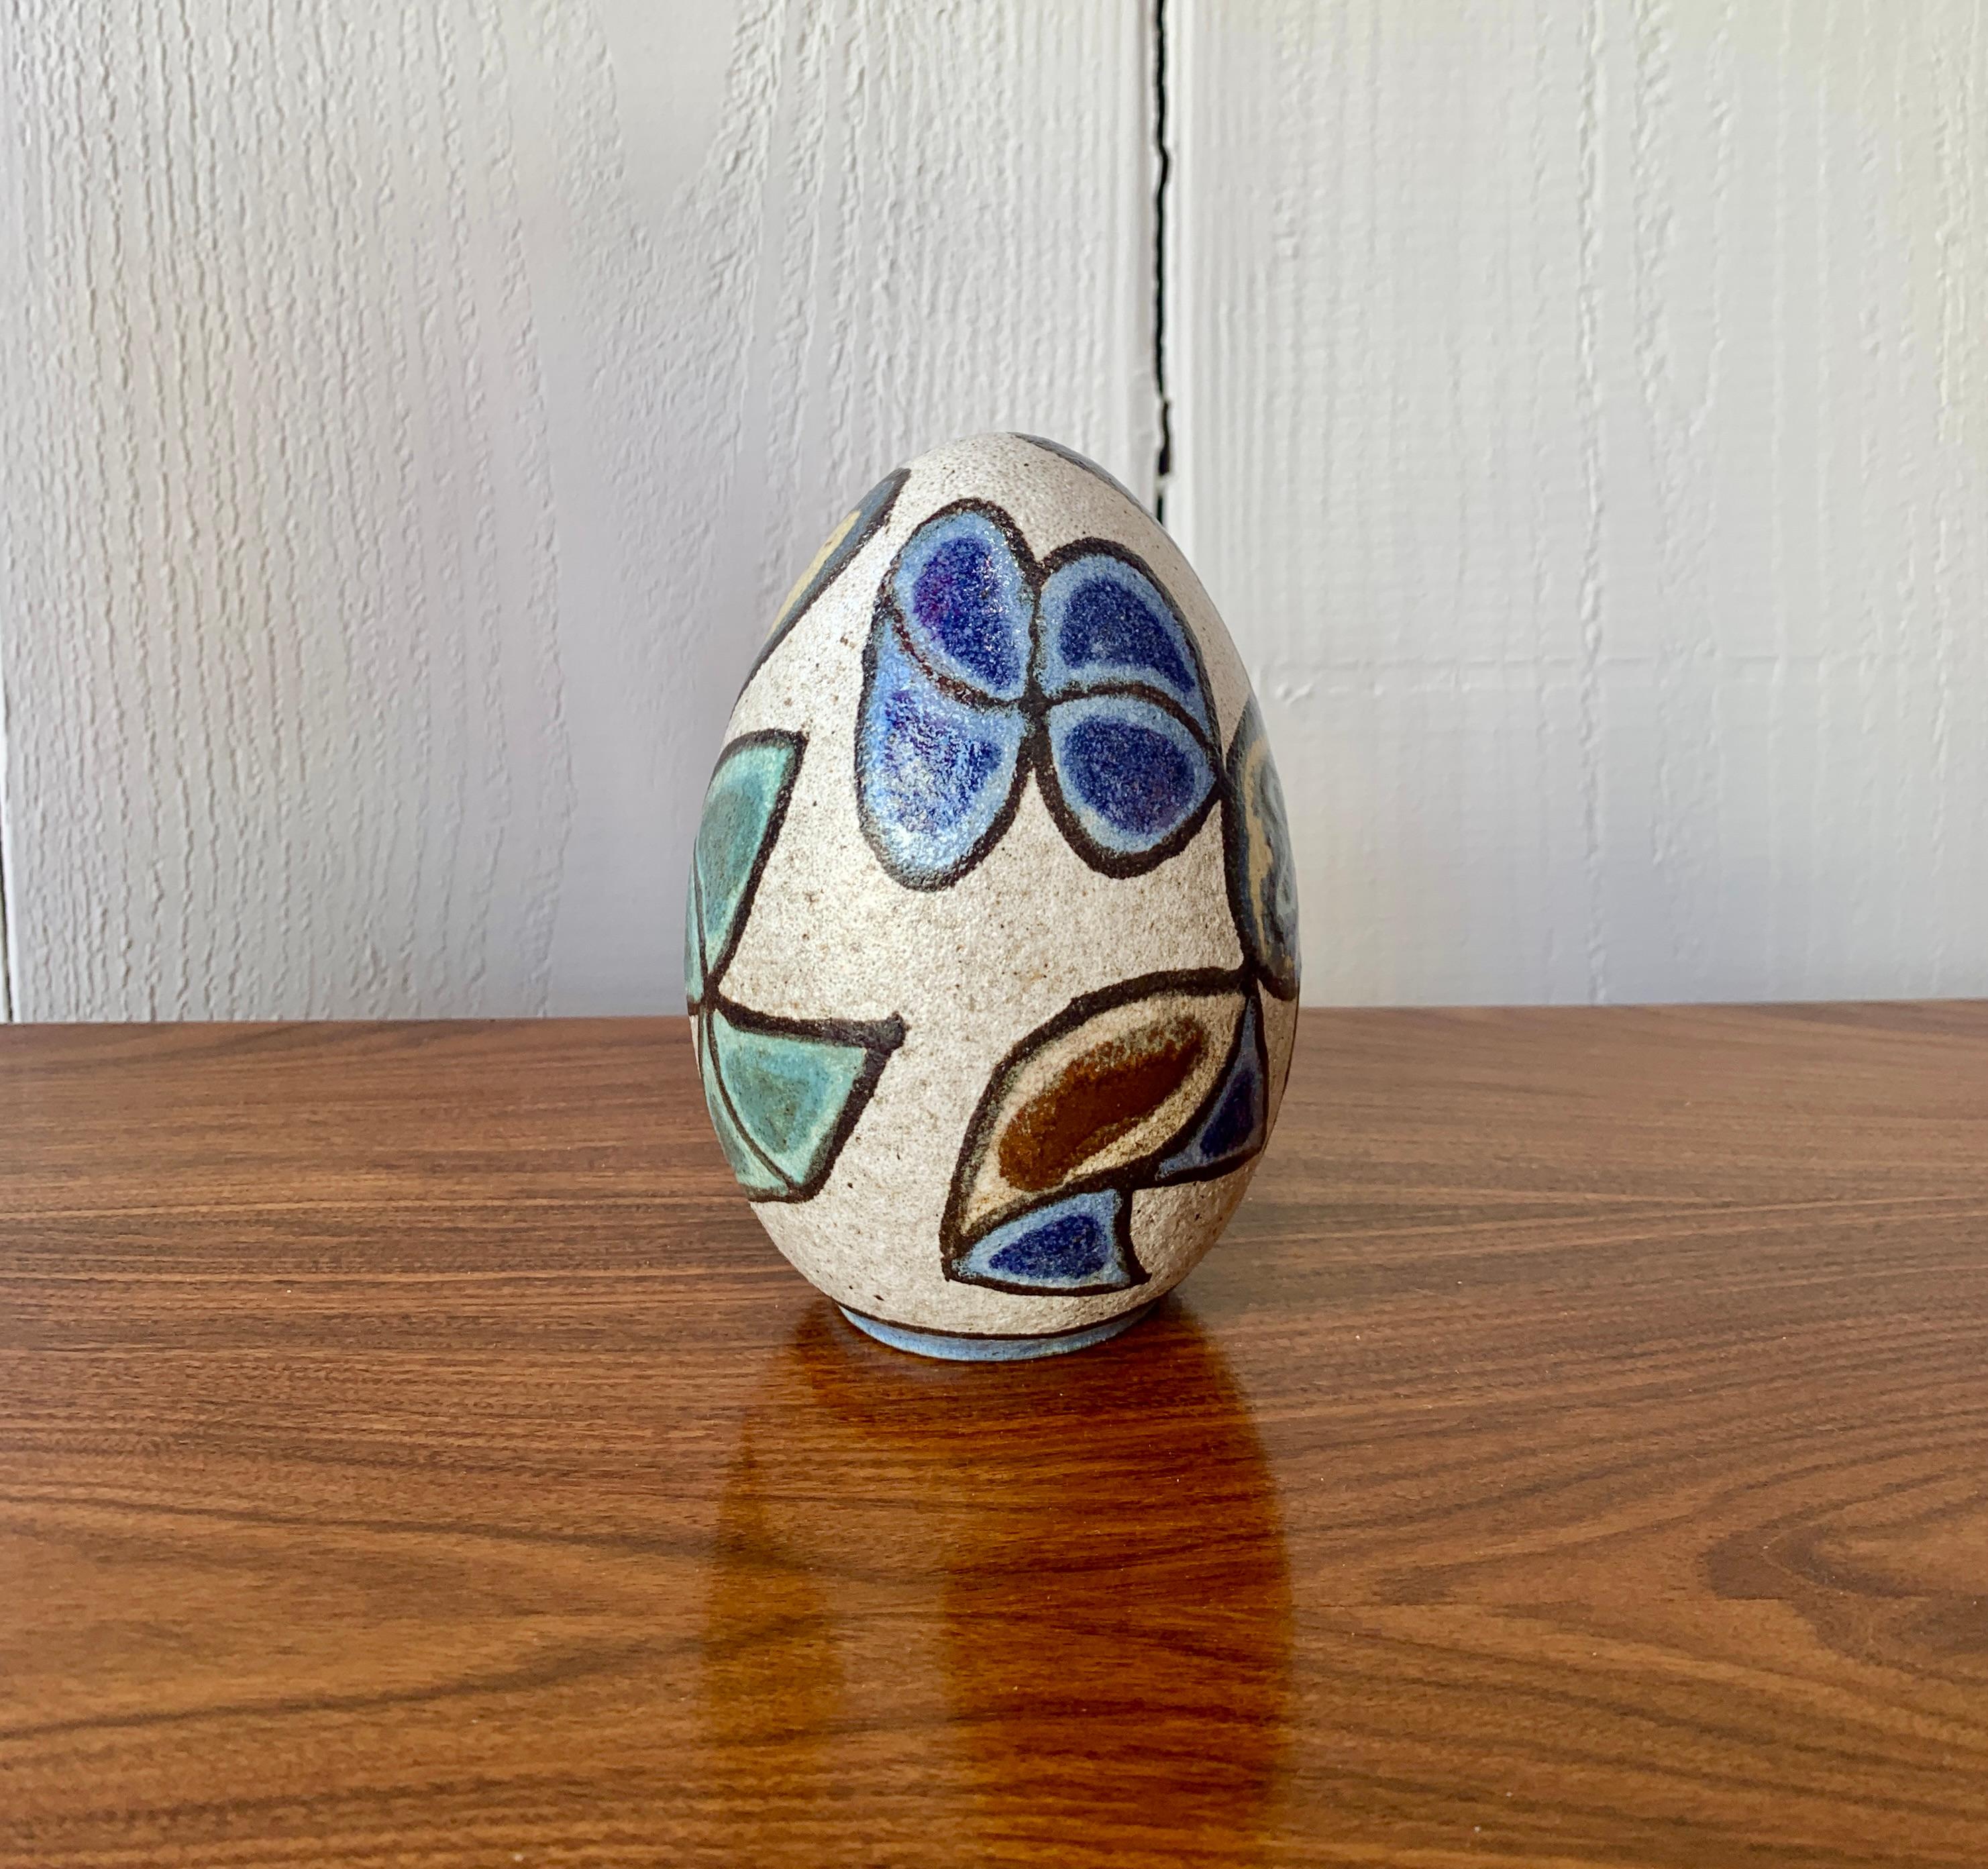 Francisco Brennand - Recife - Brazil (1927-2019)
Ceramic egg, c. 1970
Egg-shaped painted ceramic with stylized plant motifs.
Punch from the Oficina Brennand Manufacture (made in Brazil).
 